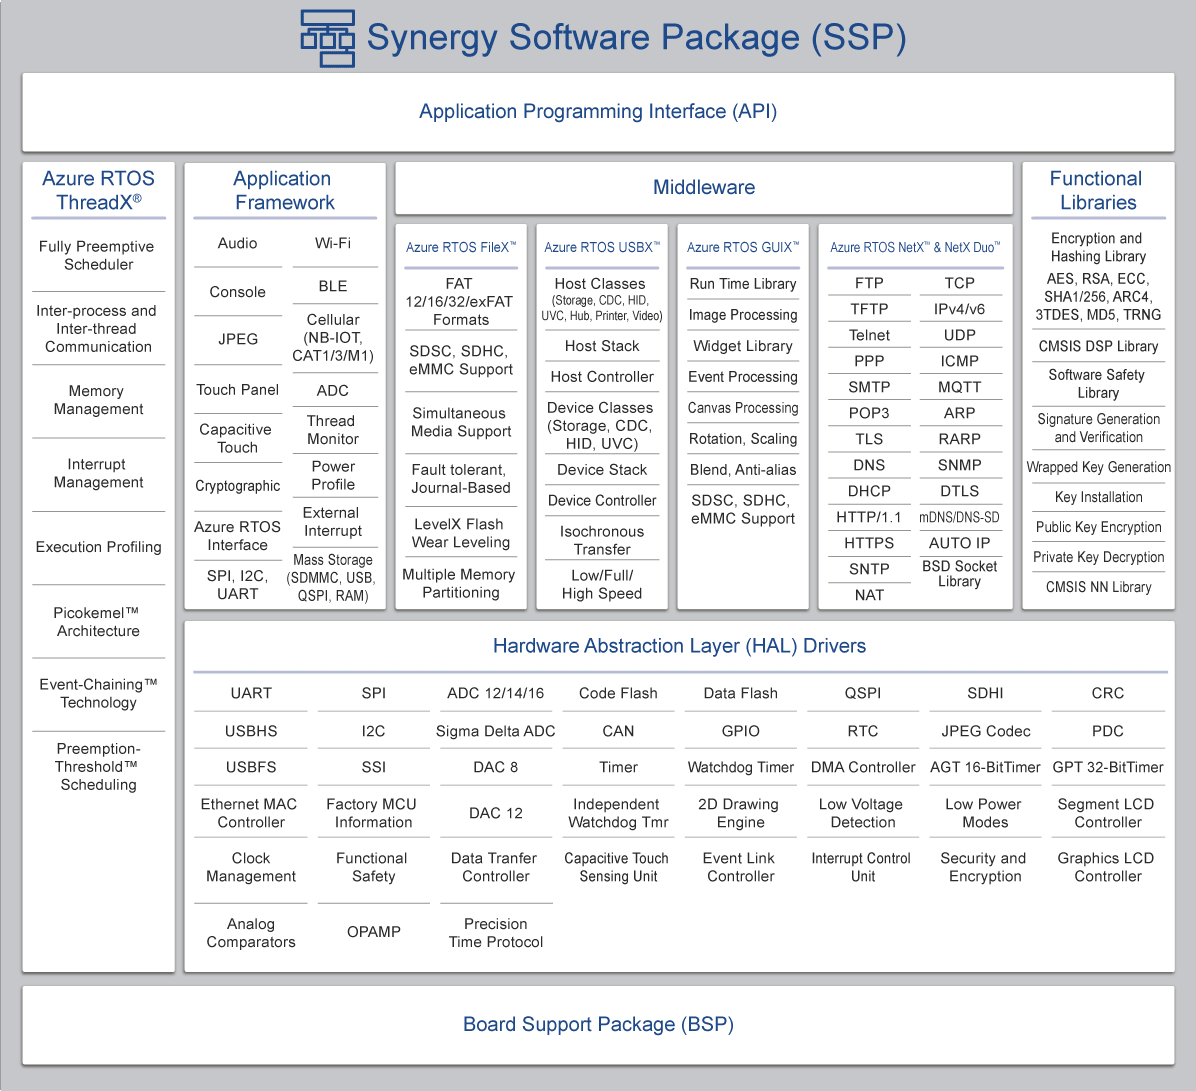 Synergy Software Package (SSP) Components